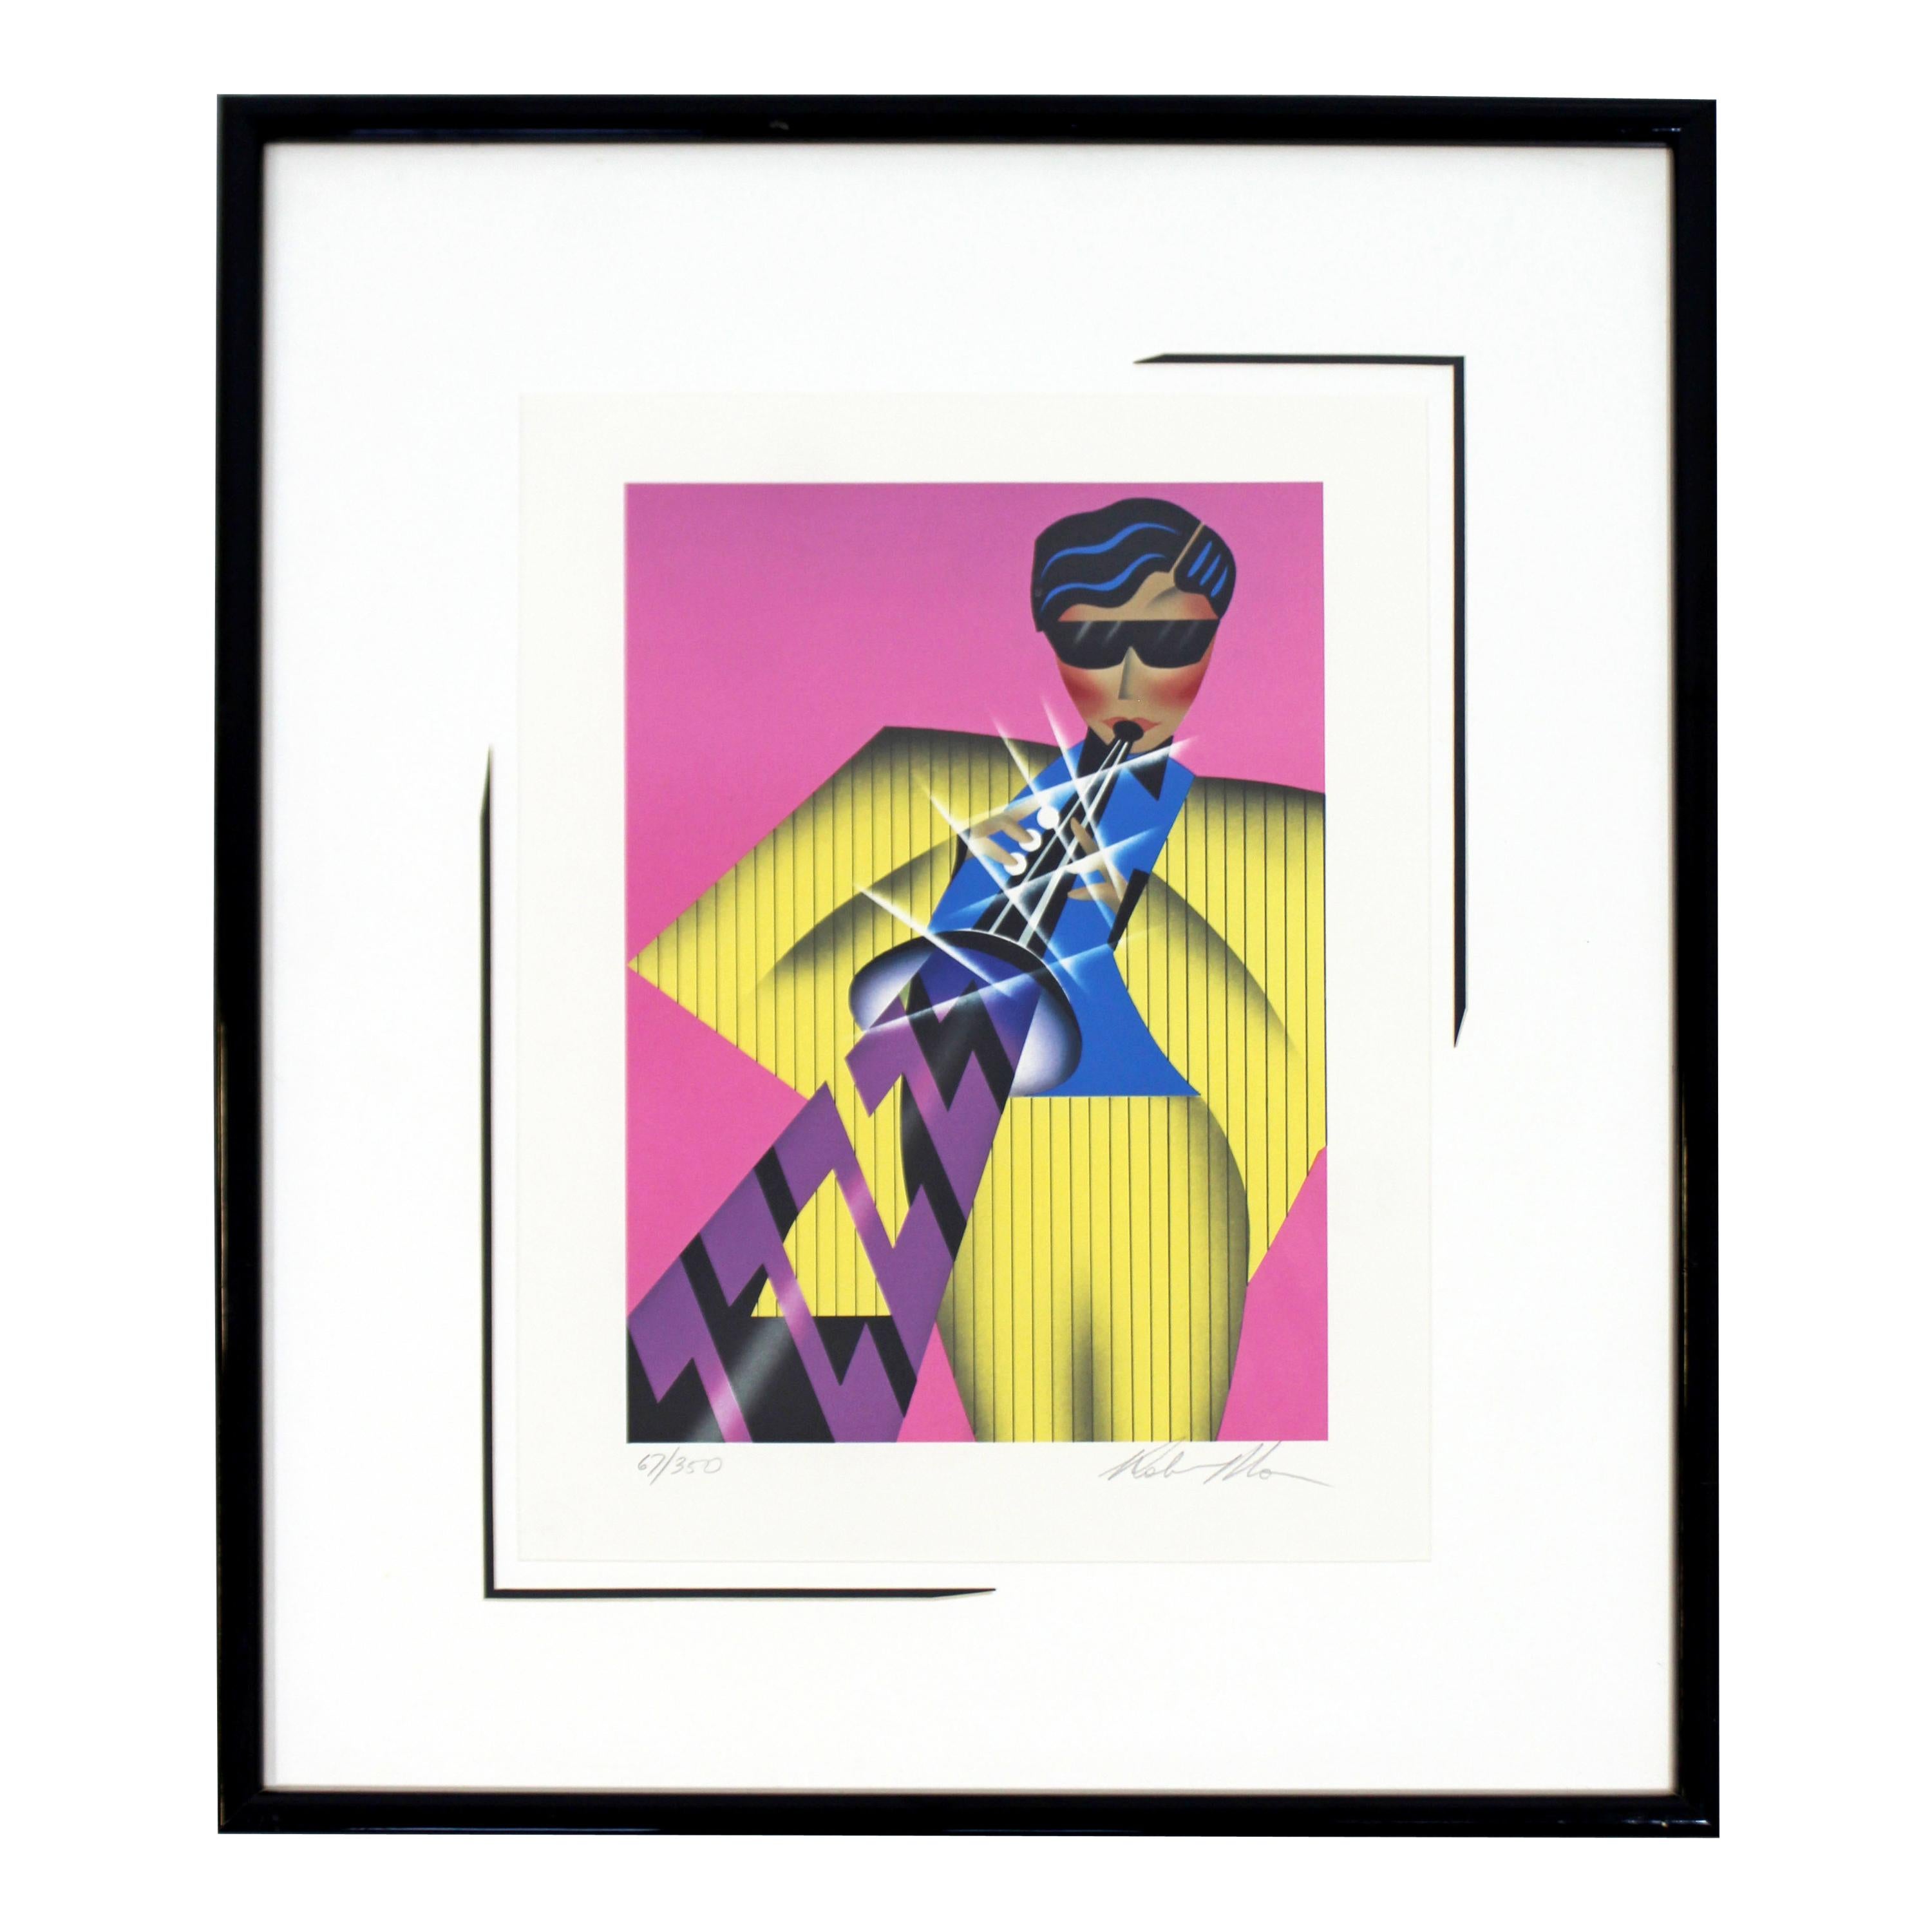 For your consideration is a funky, framed lithograph, depicting a Jazz player, signed by Robin Morris and numbered 67/350, circa 1980s. In excellent condition. The dimensions of the frame are 20